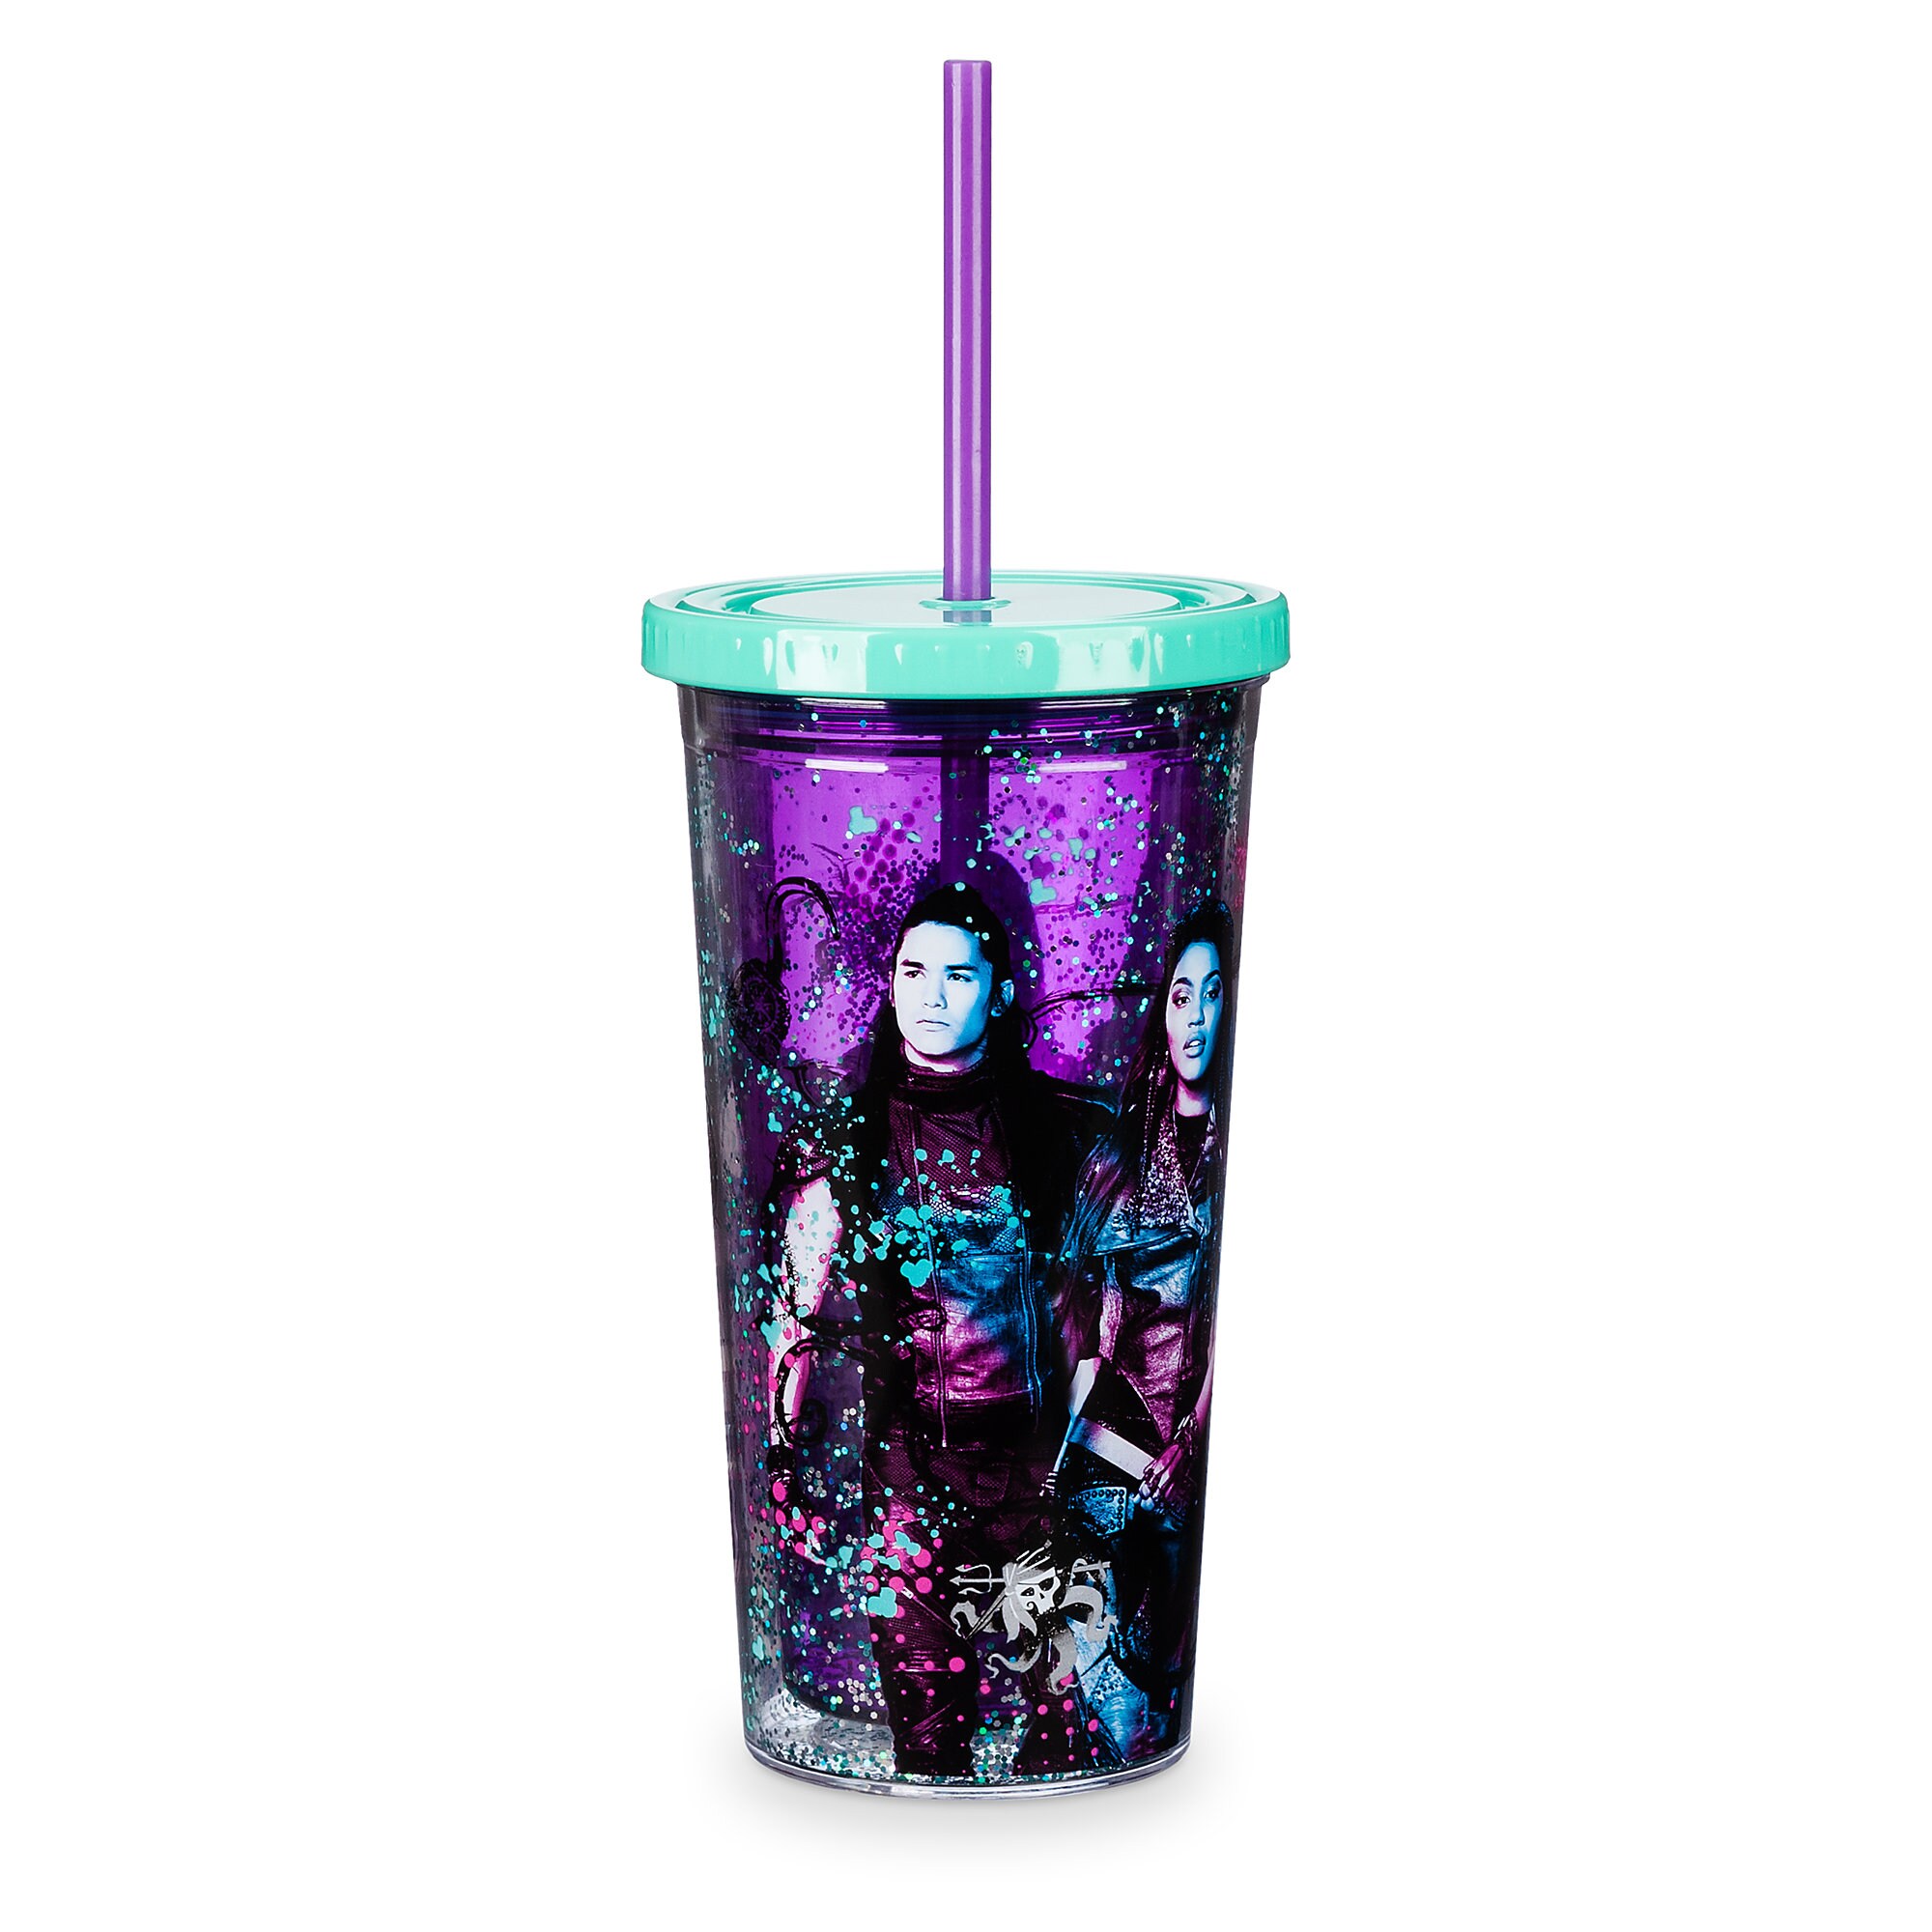 Descendants 3 Tumbler with Straw - Large now available – Dis